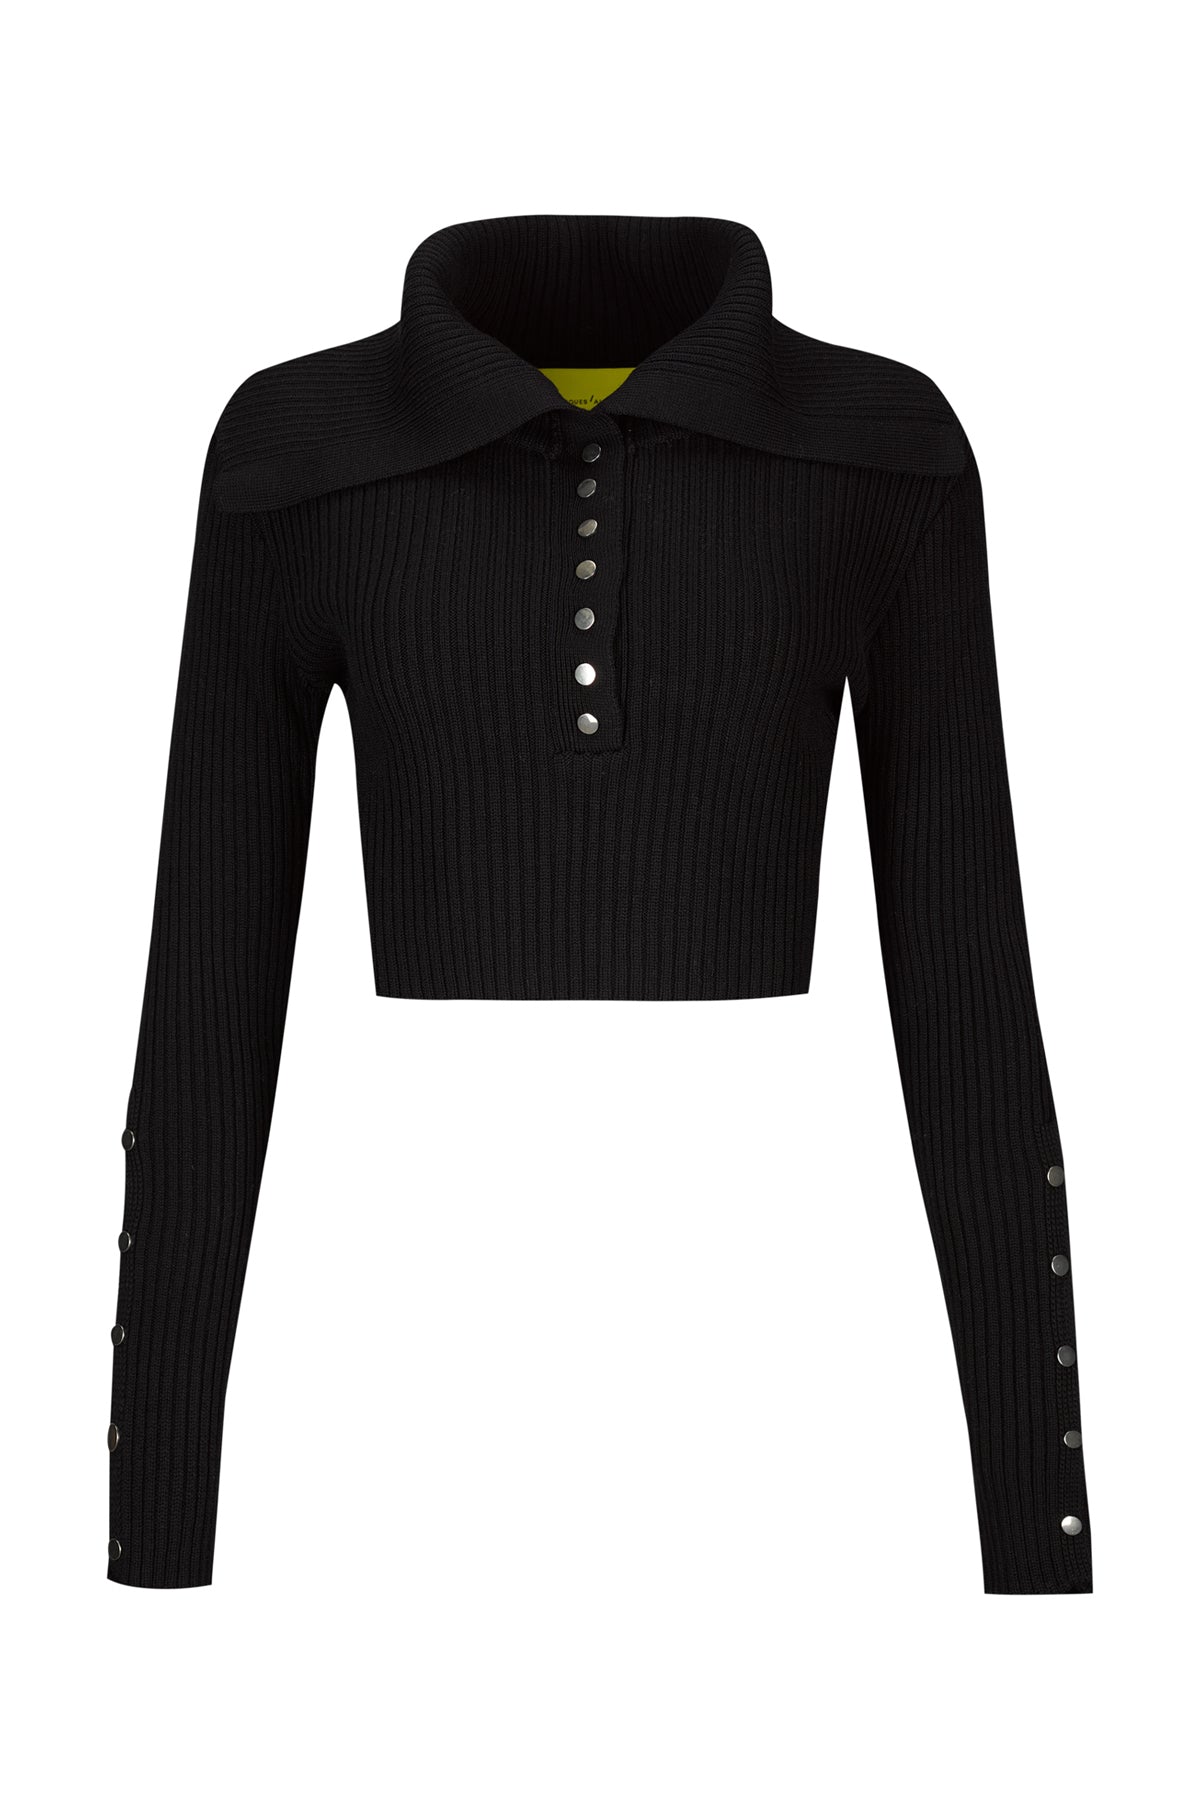 BLACK MERINO WOOL KNITTED CROPPED TOP WITH BIG COLLAR marques almeida